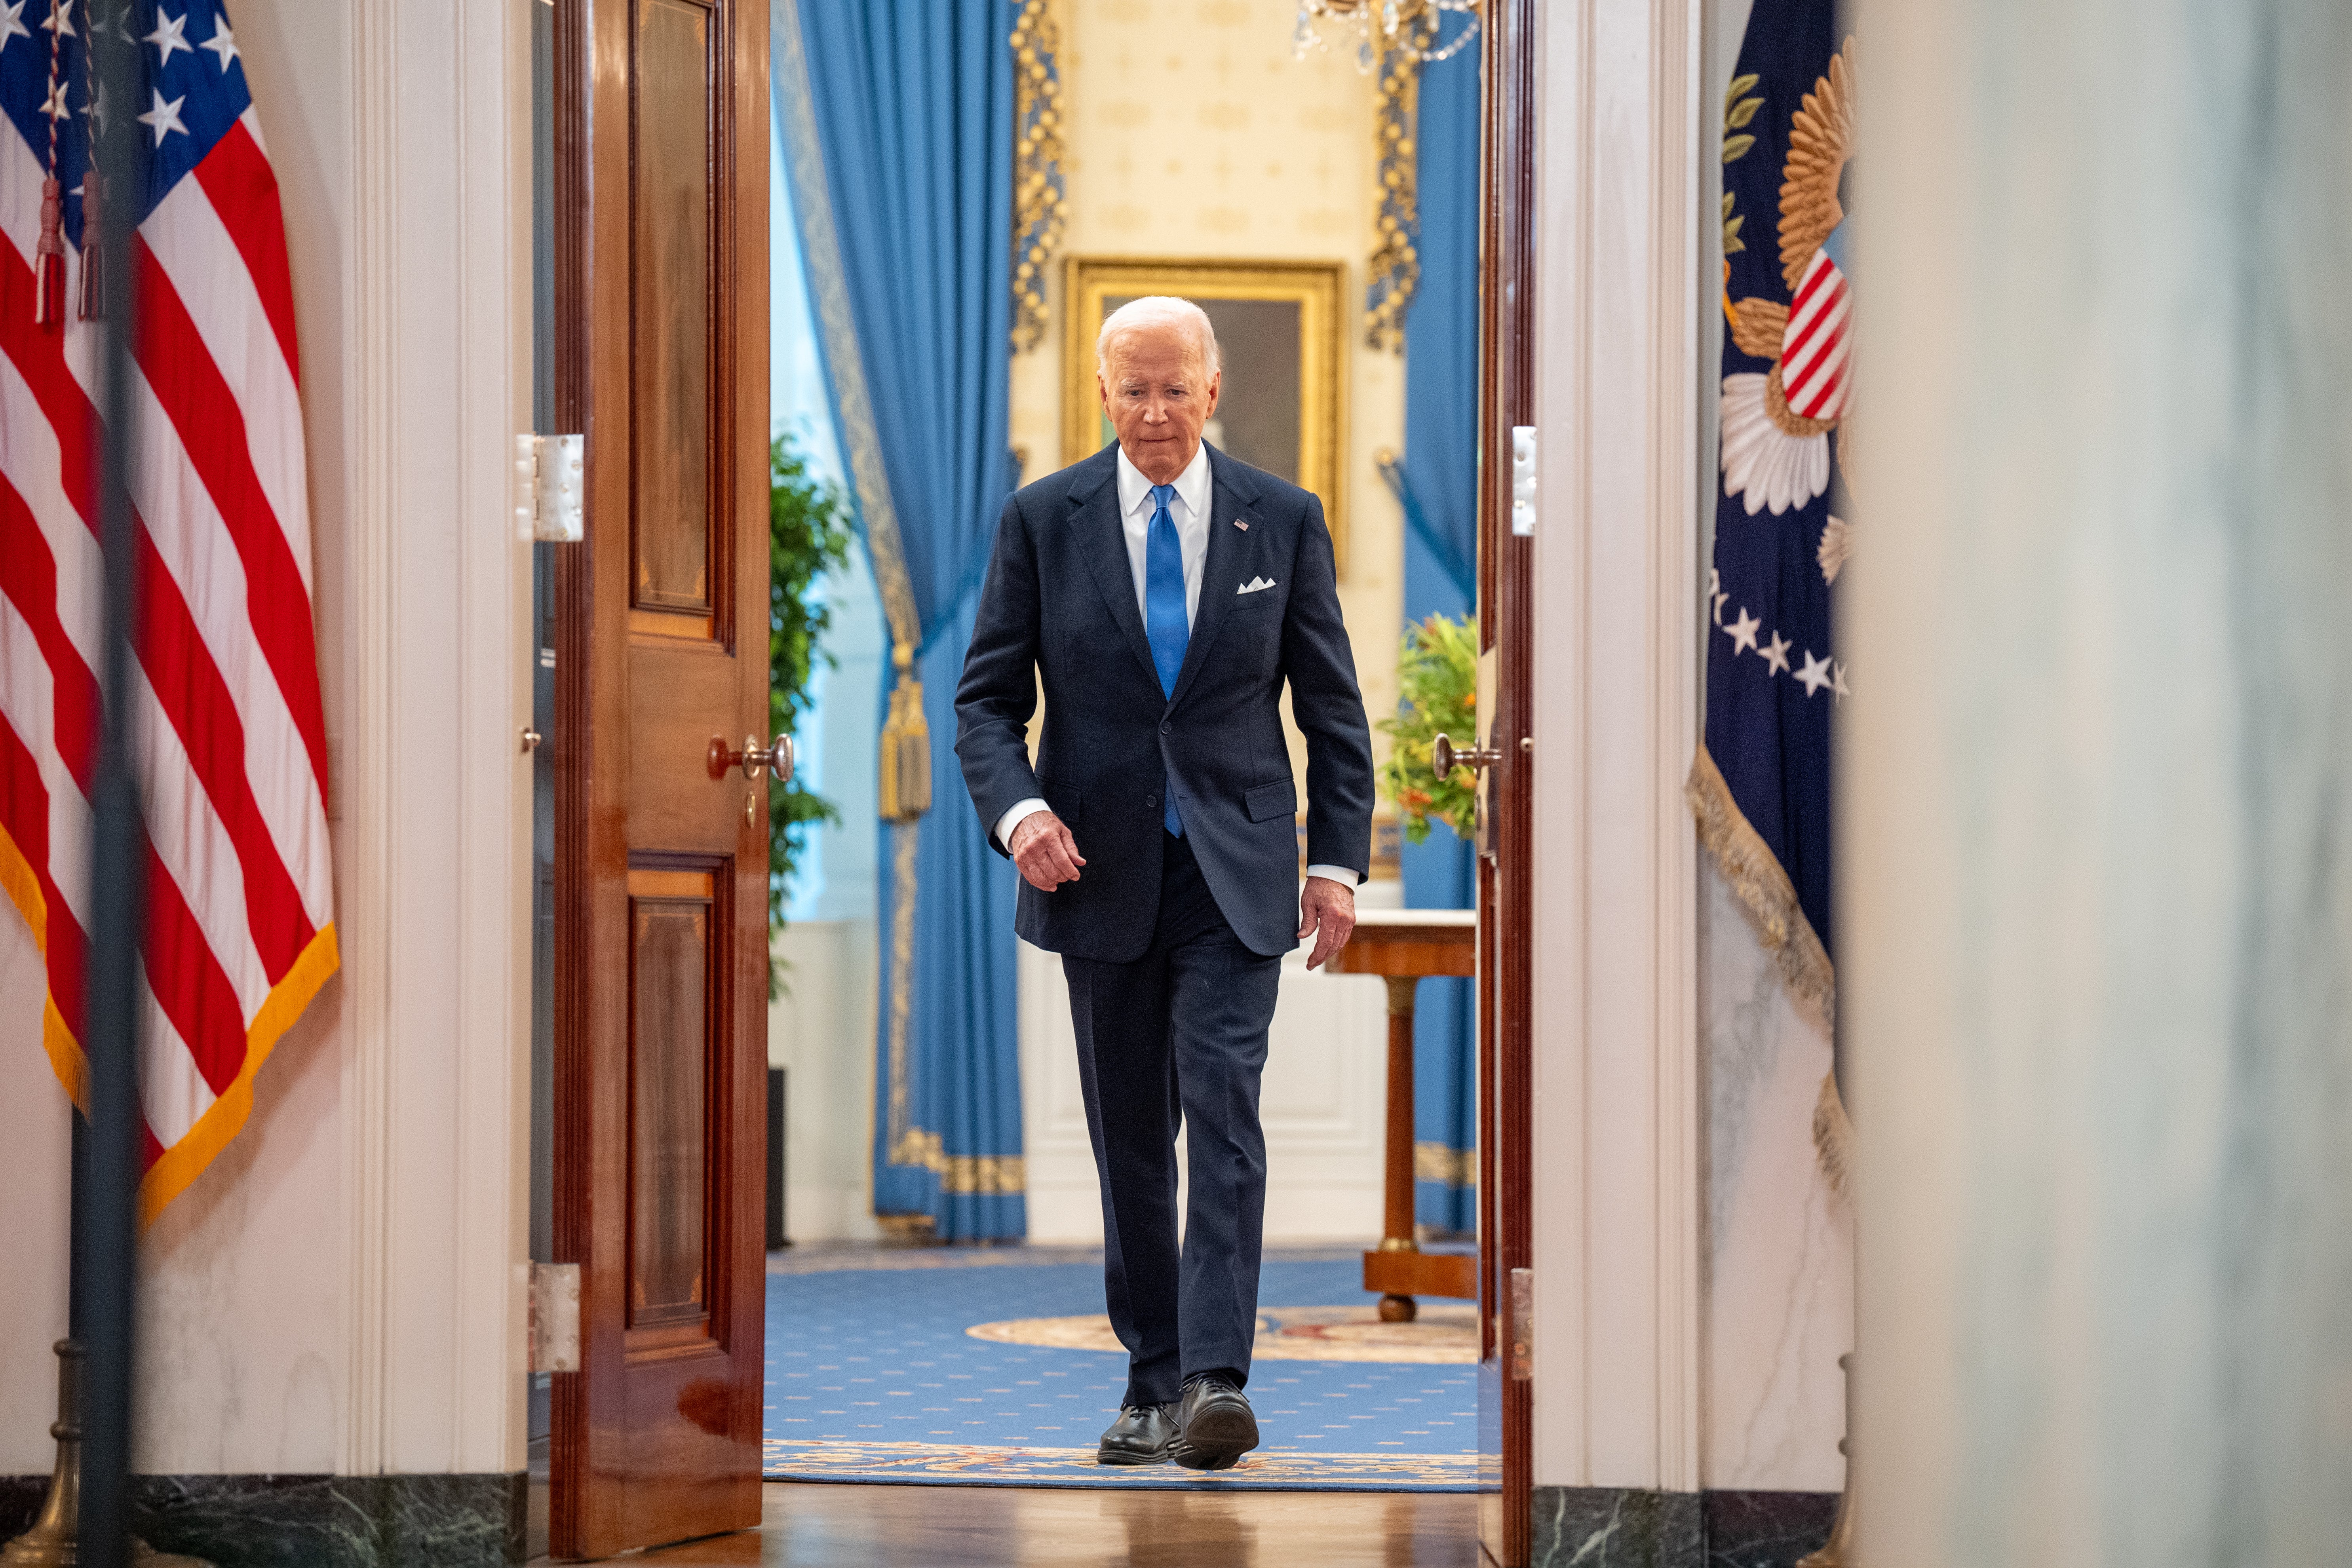 President Joe Biden prepares to deliver remarks at the White House on July 1.